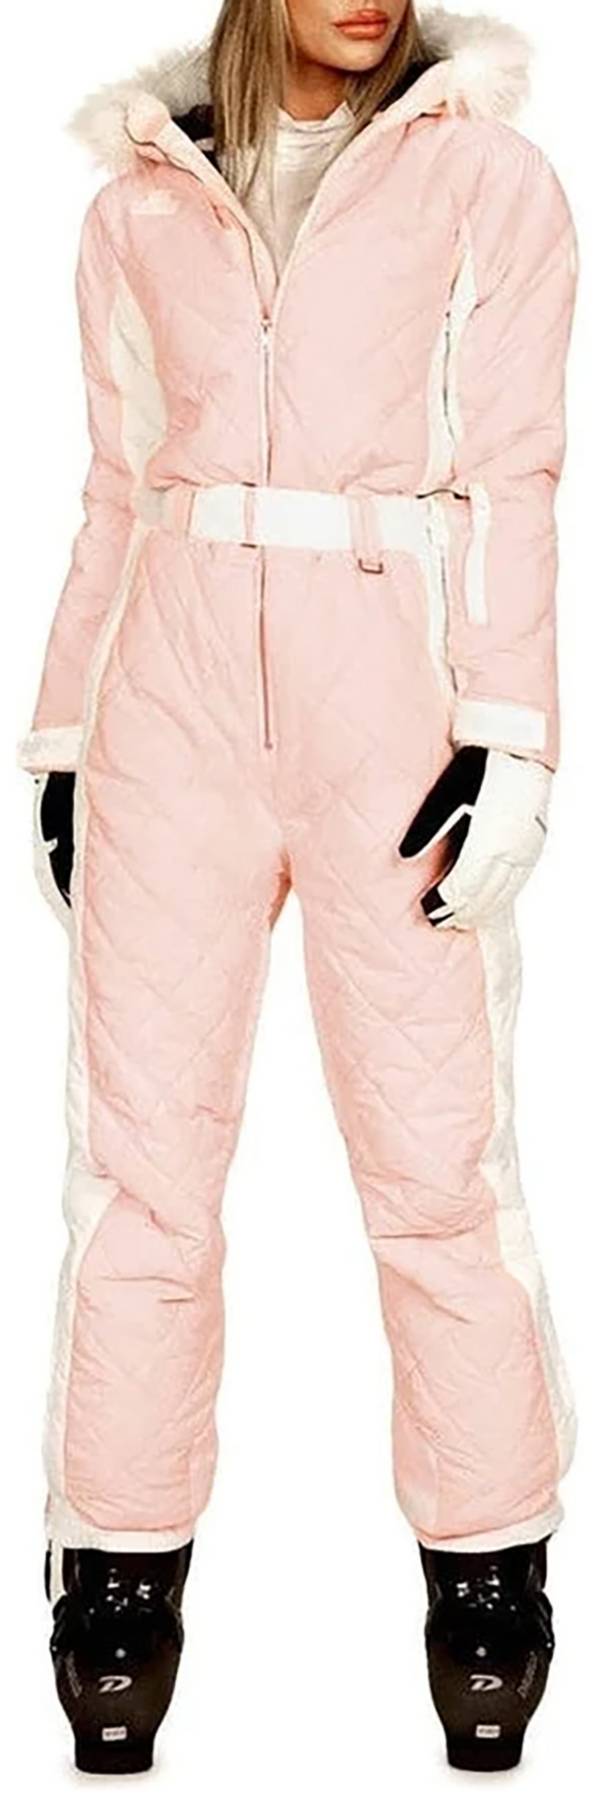 Tipsy Elves Women's Powder Pink Snow Suit product image